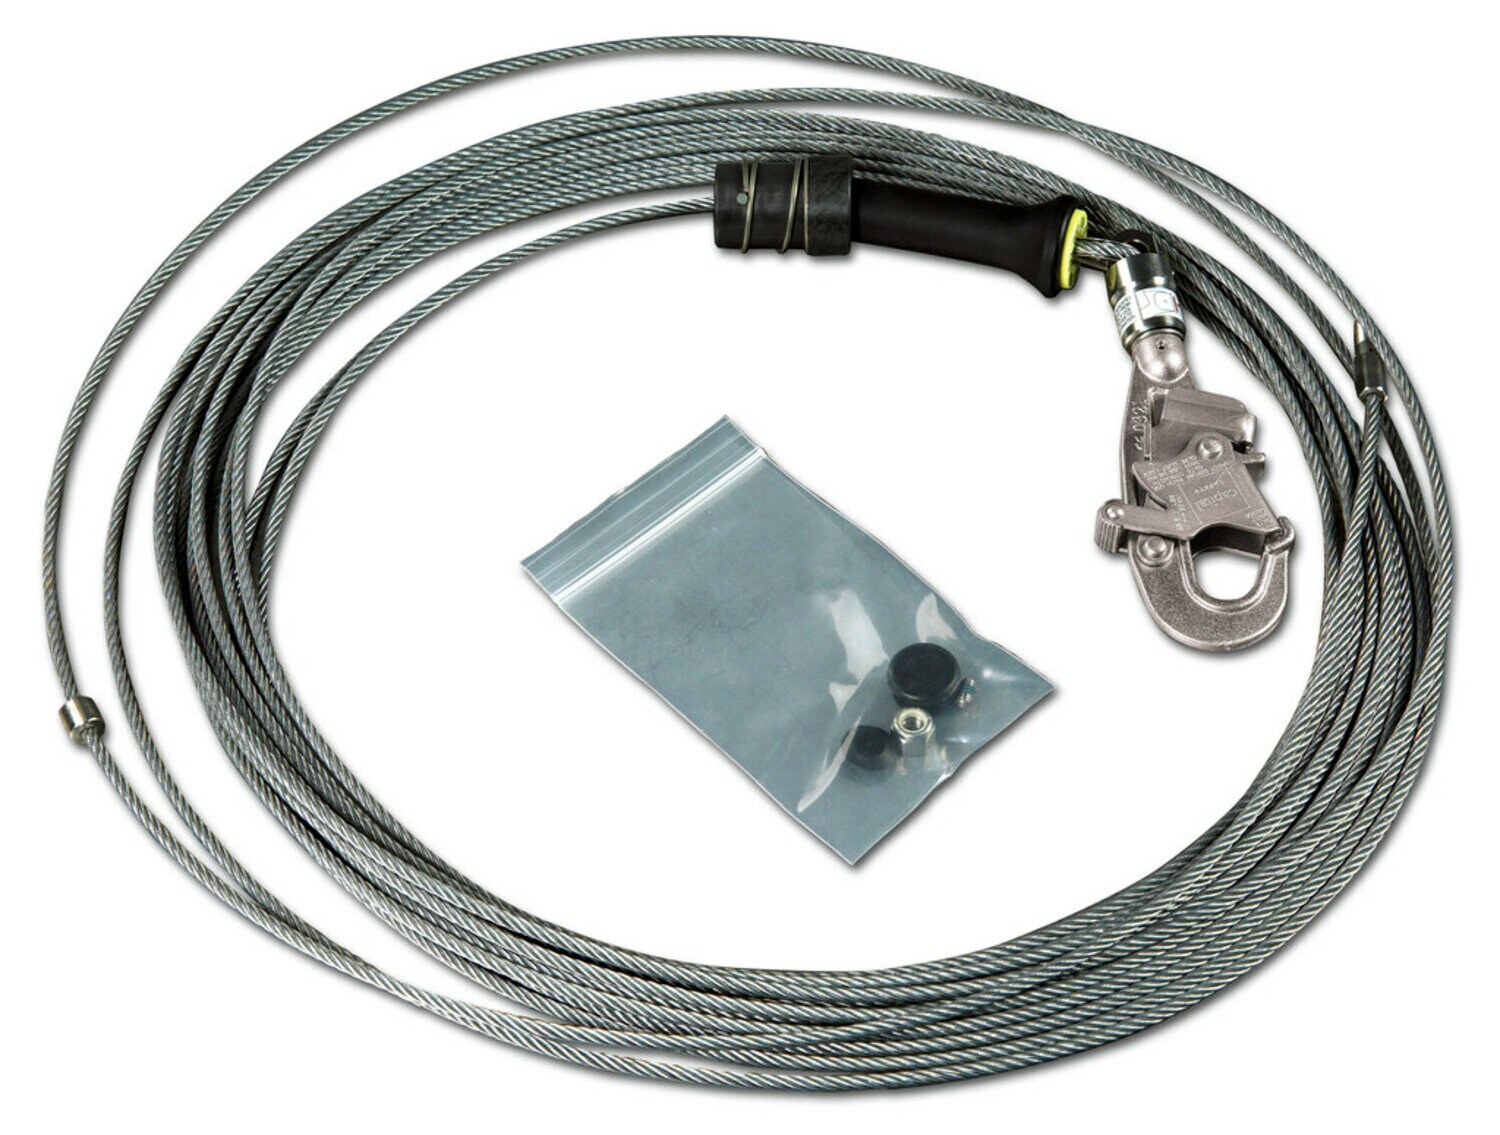 7100249272 - 3M DBI-SALA Sealed-Blok Self-Retracting Lifeline Cable Assembly 3900107, Stainless Steel, 50 ft